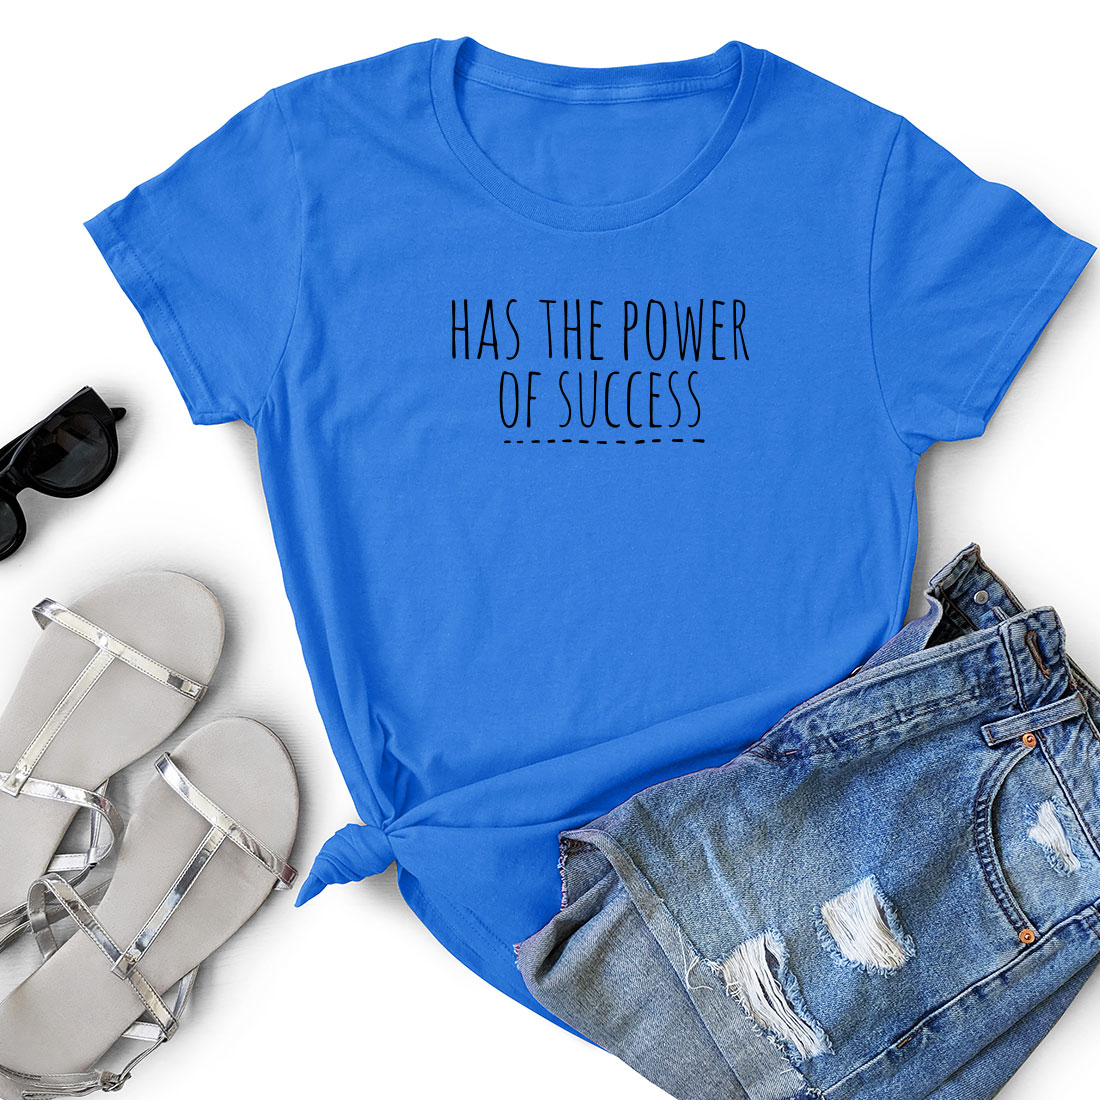 T - shirt that says has the power of success.